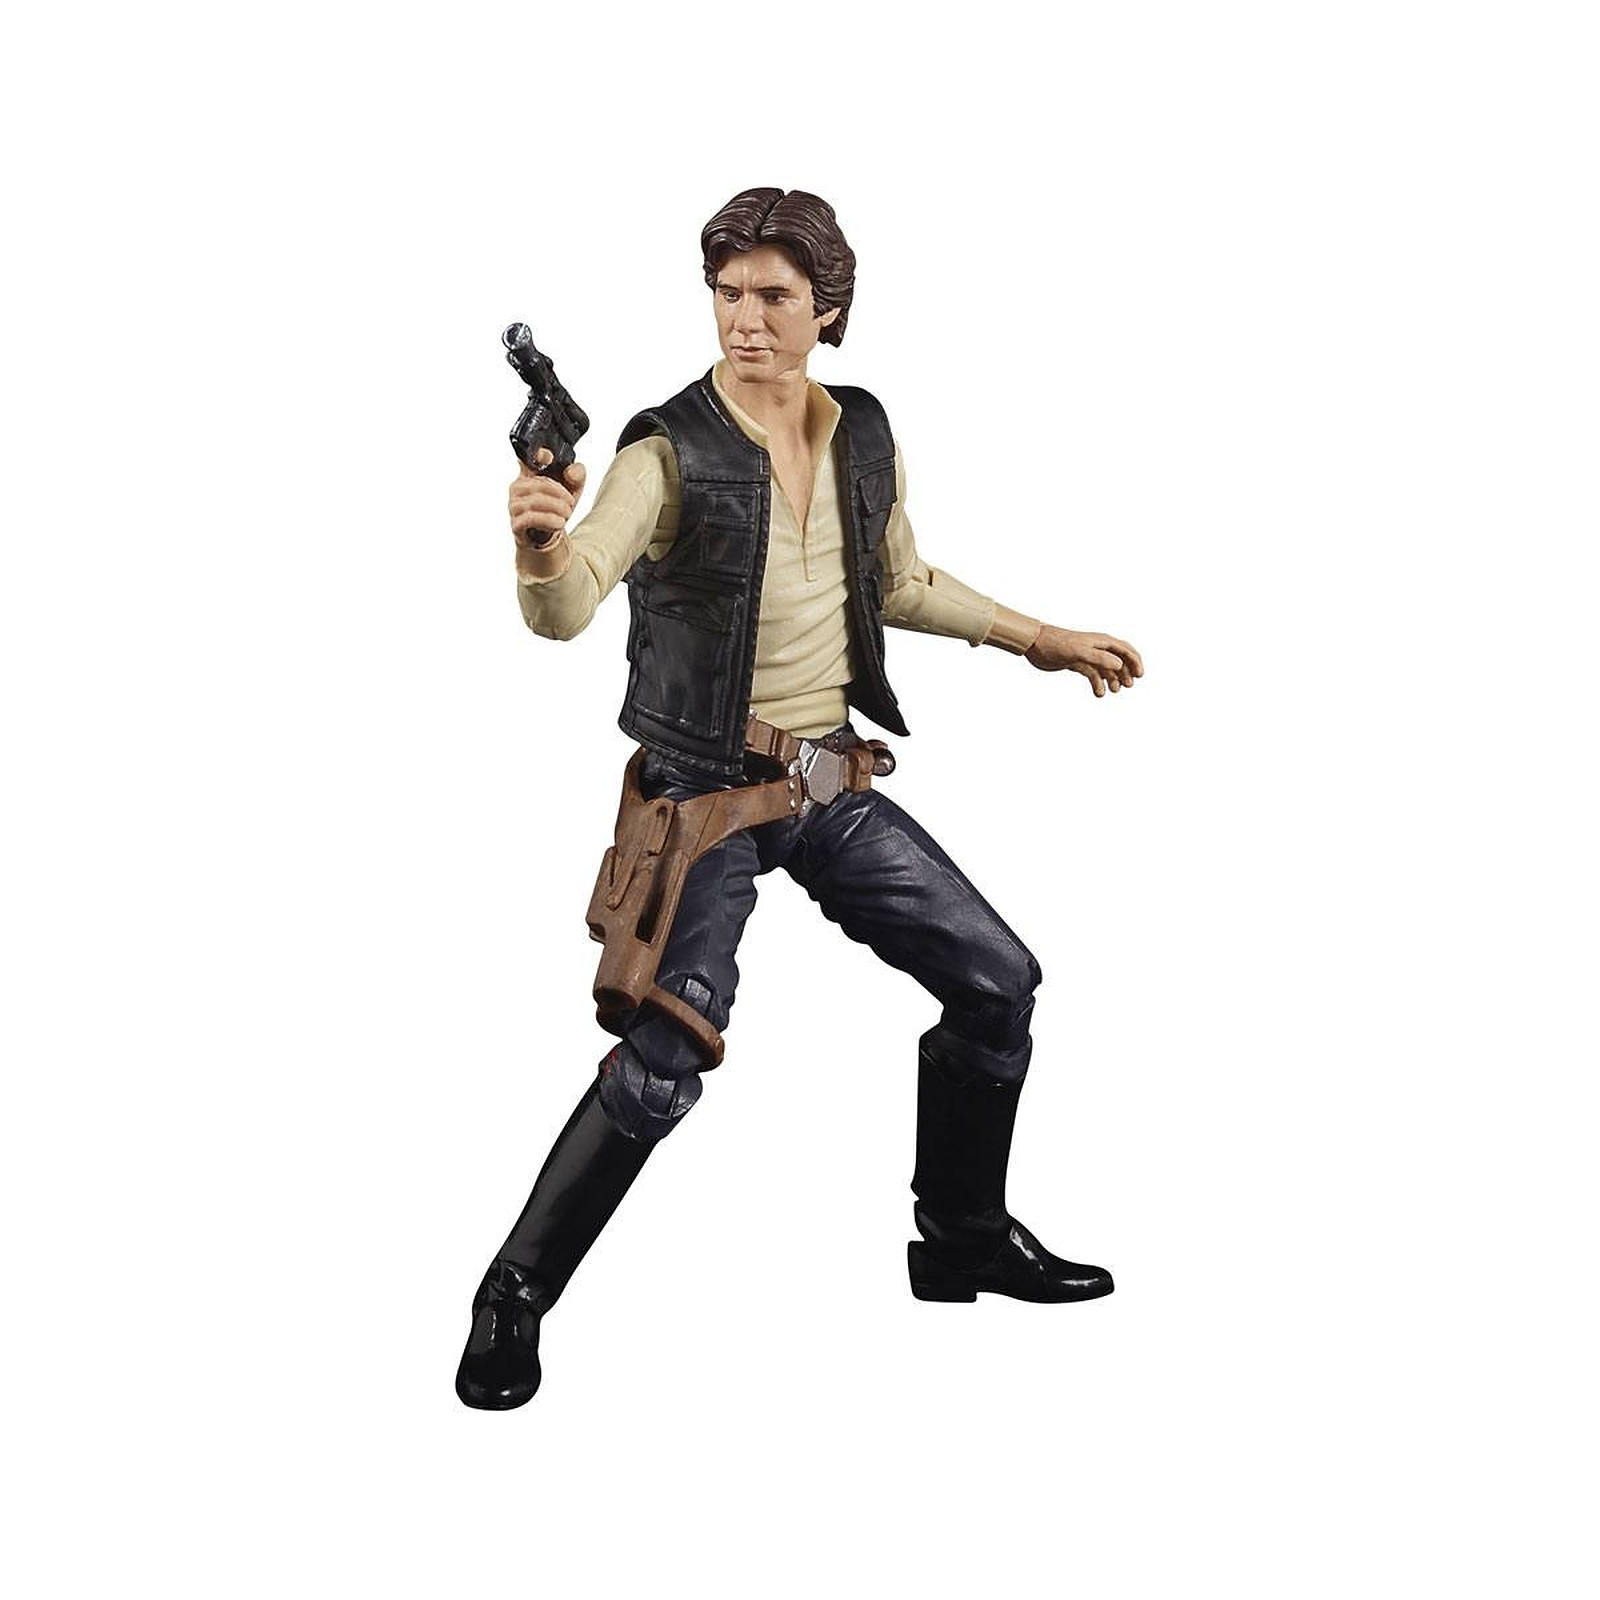 Star Wars - Figurine Black Series The Power of the Force 2021 Han Solo Exclusive 15 cm - Figurines Hasbro